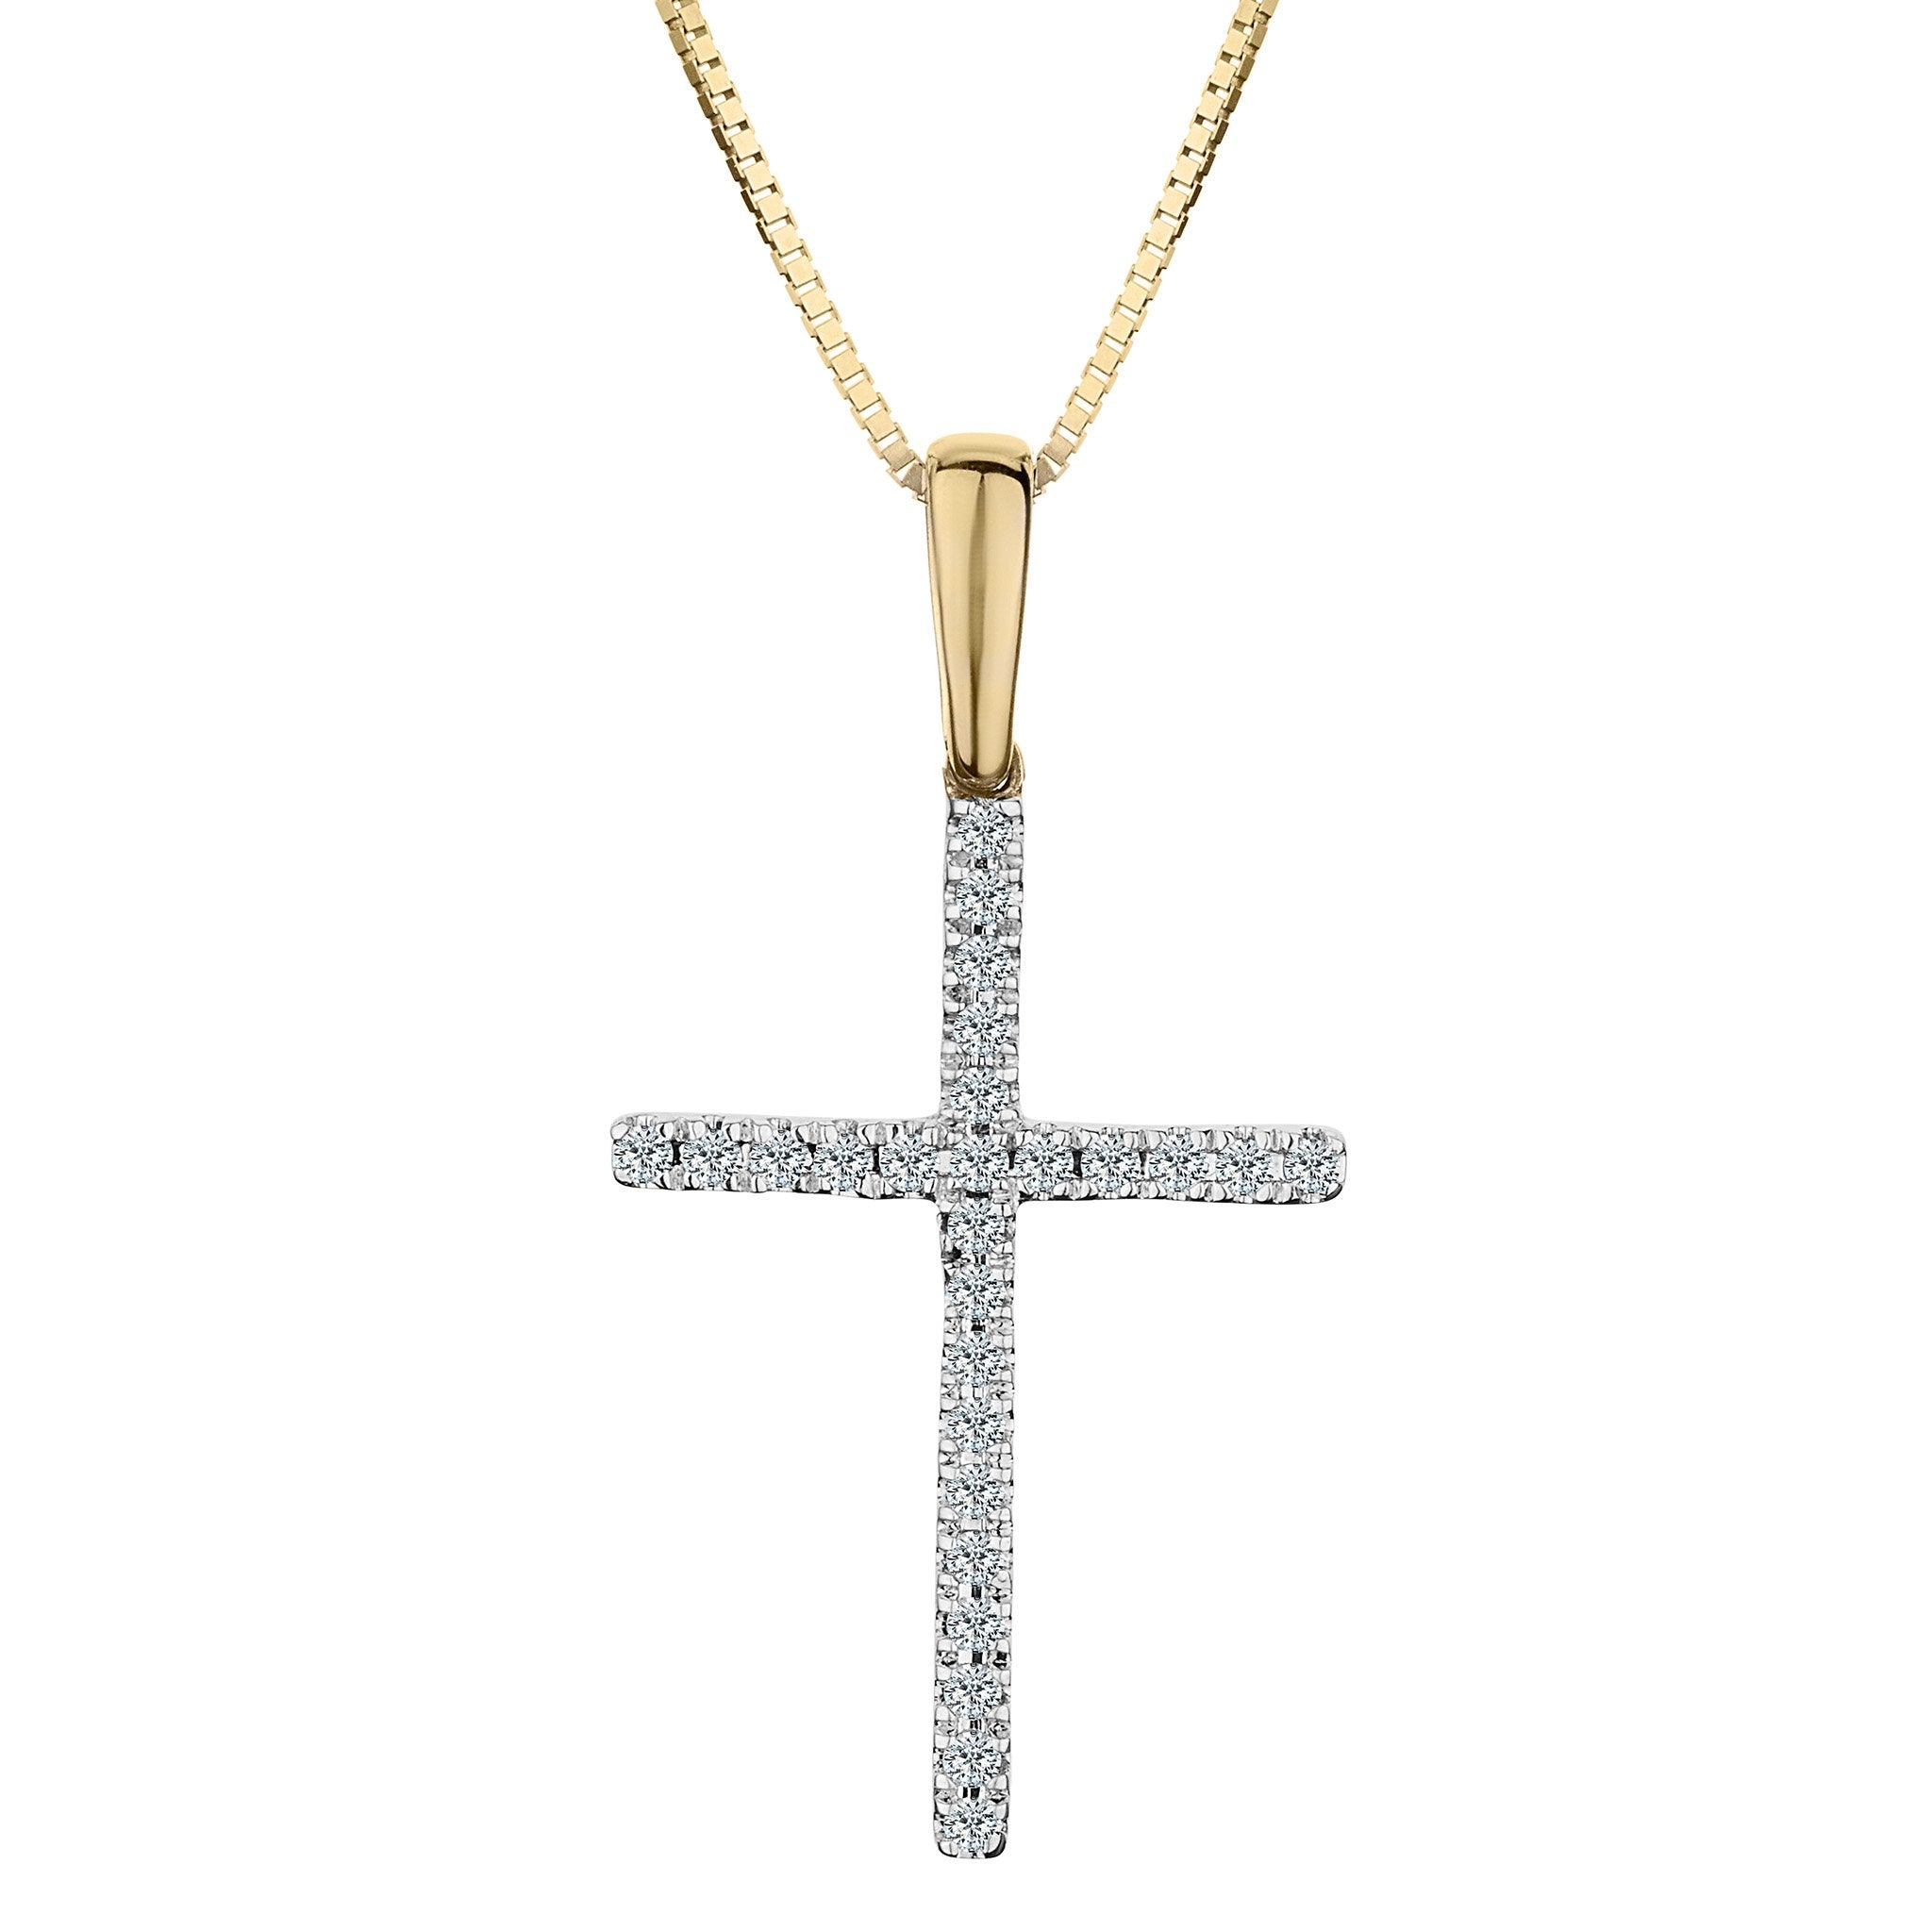 .10 Carat Diamond Cross Pendant,  10kt Yellow Gold. Necklaces and Pendants. Griffin Jewellery Designs.